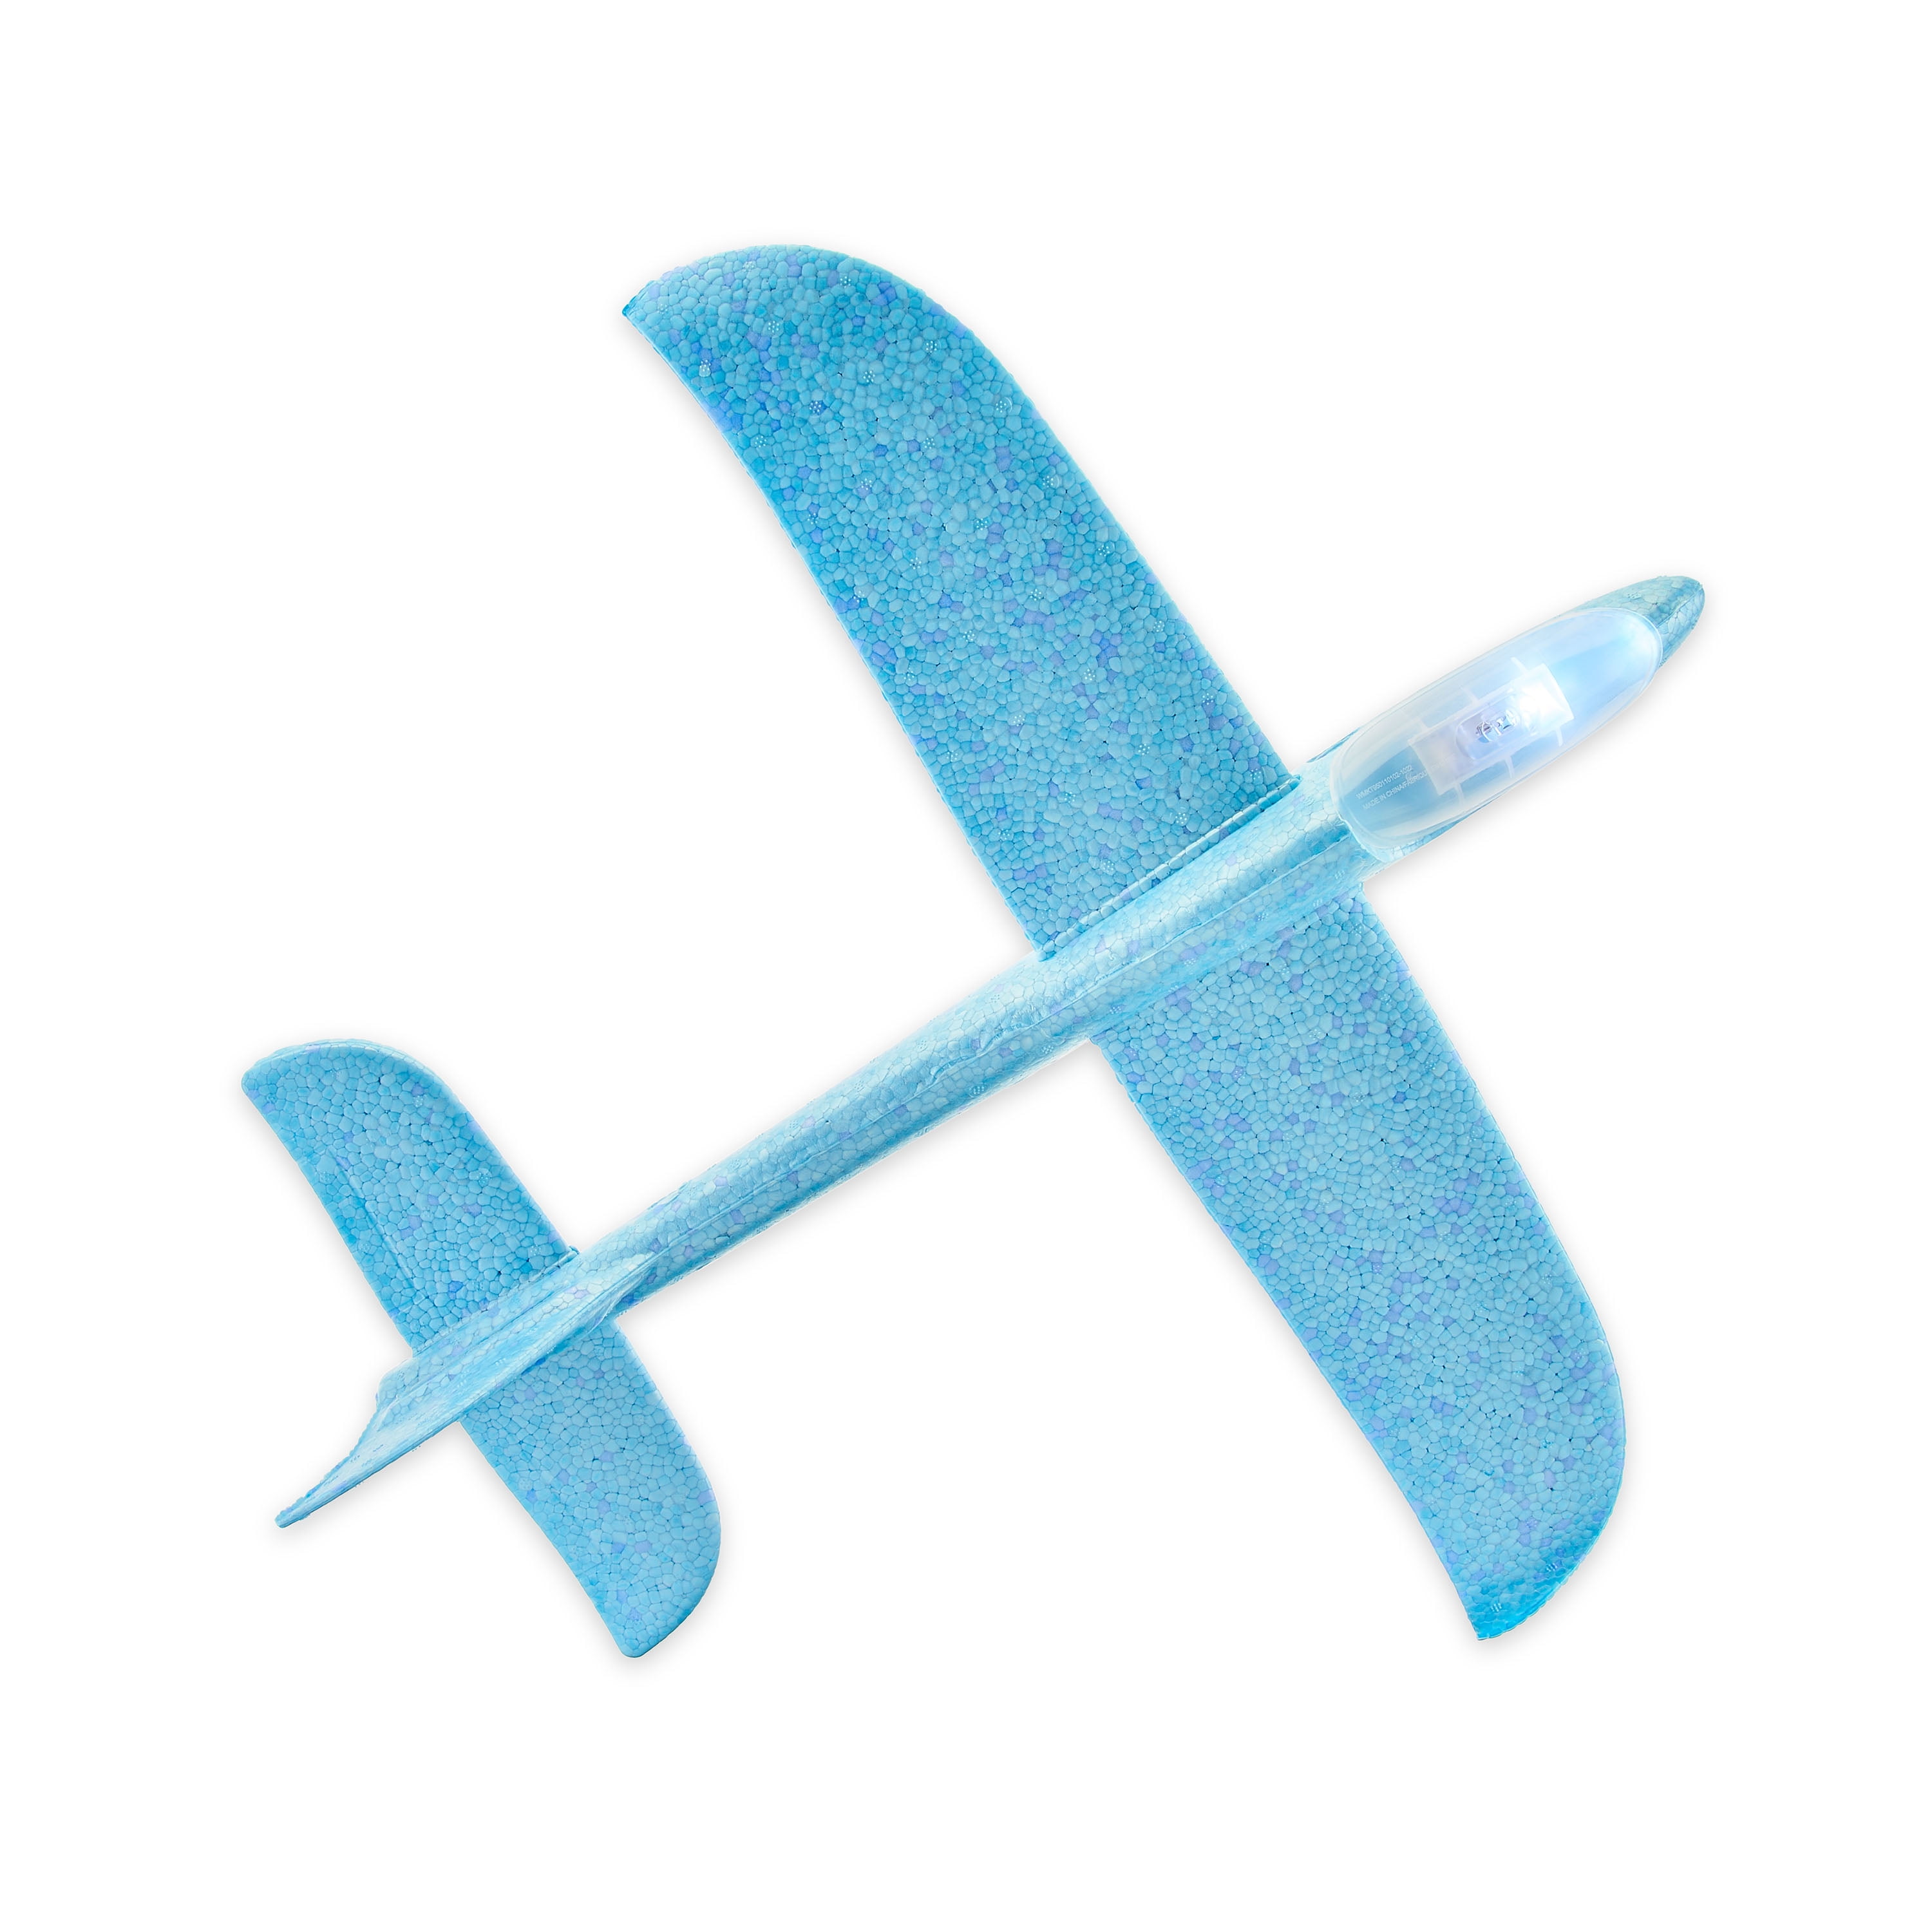 WAY TO CELEBRATE! Way To Celebrate Easter Light-Up Foam Glider Plane, Blue